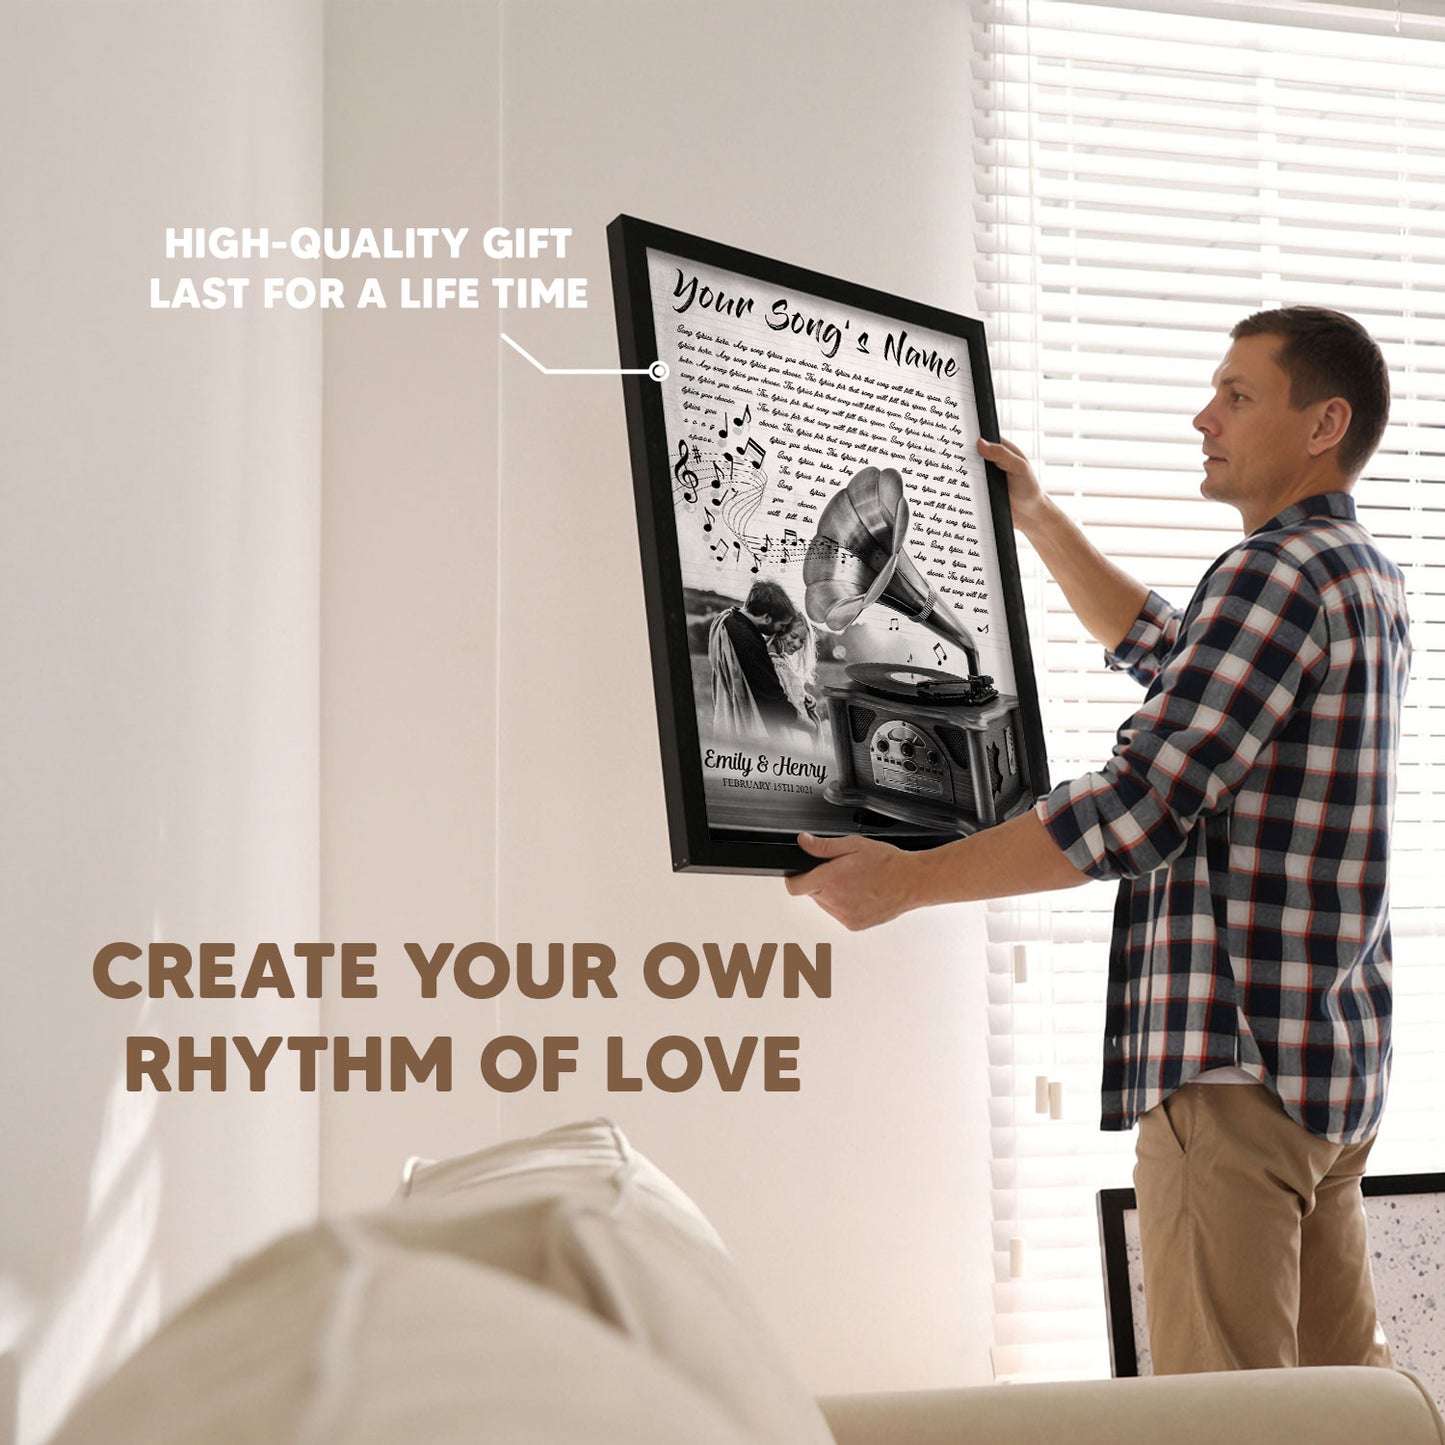 Song Lyrics Record Anniversary Customized Image Vertical Poster